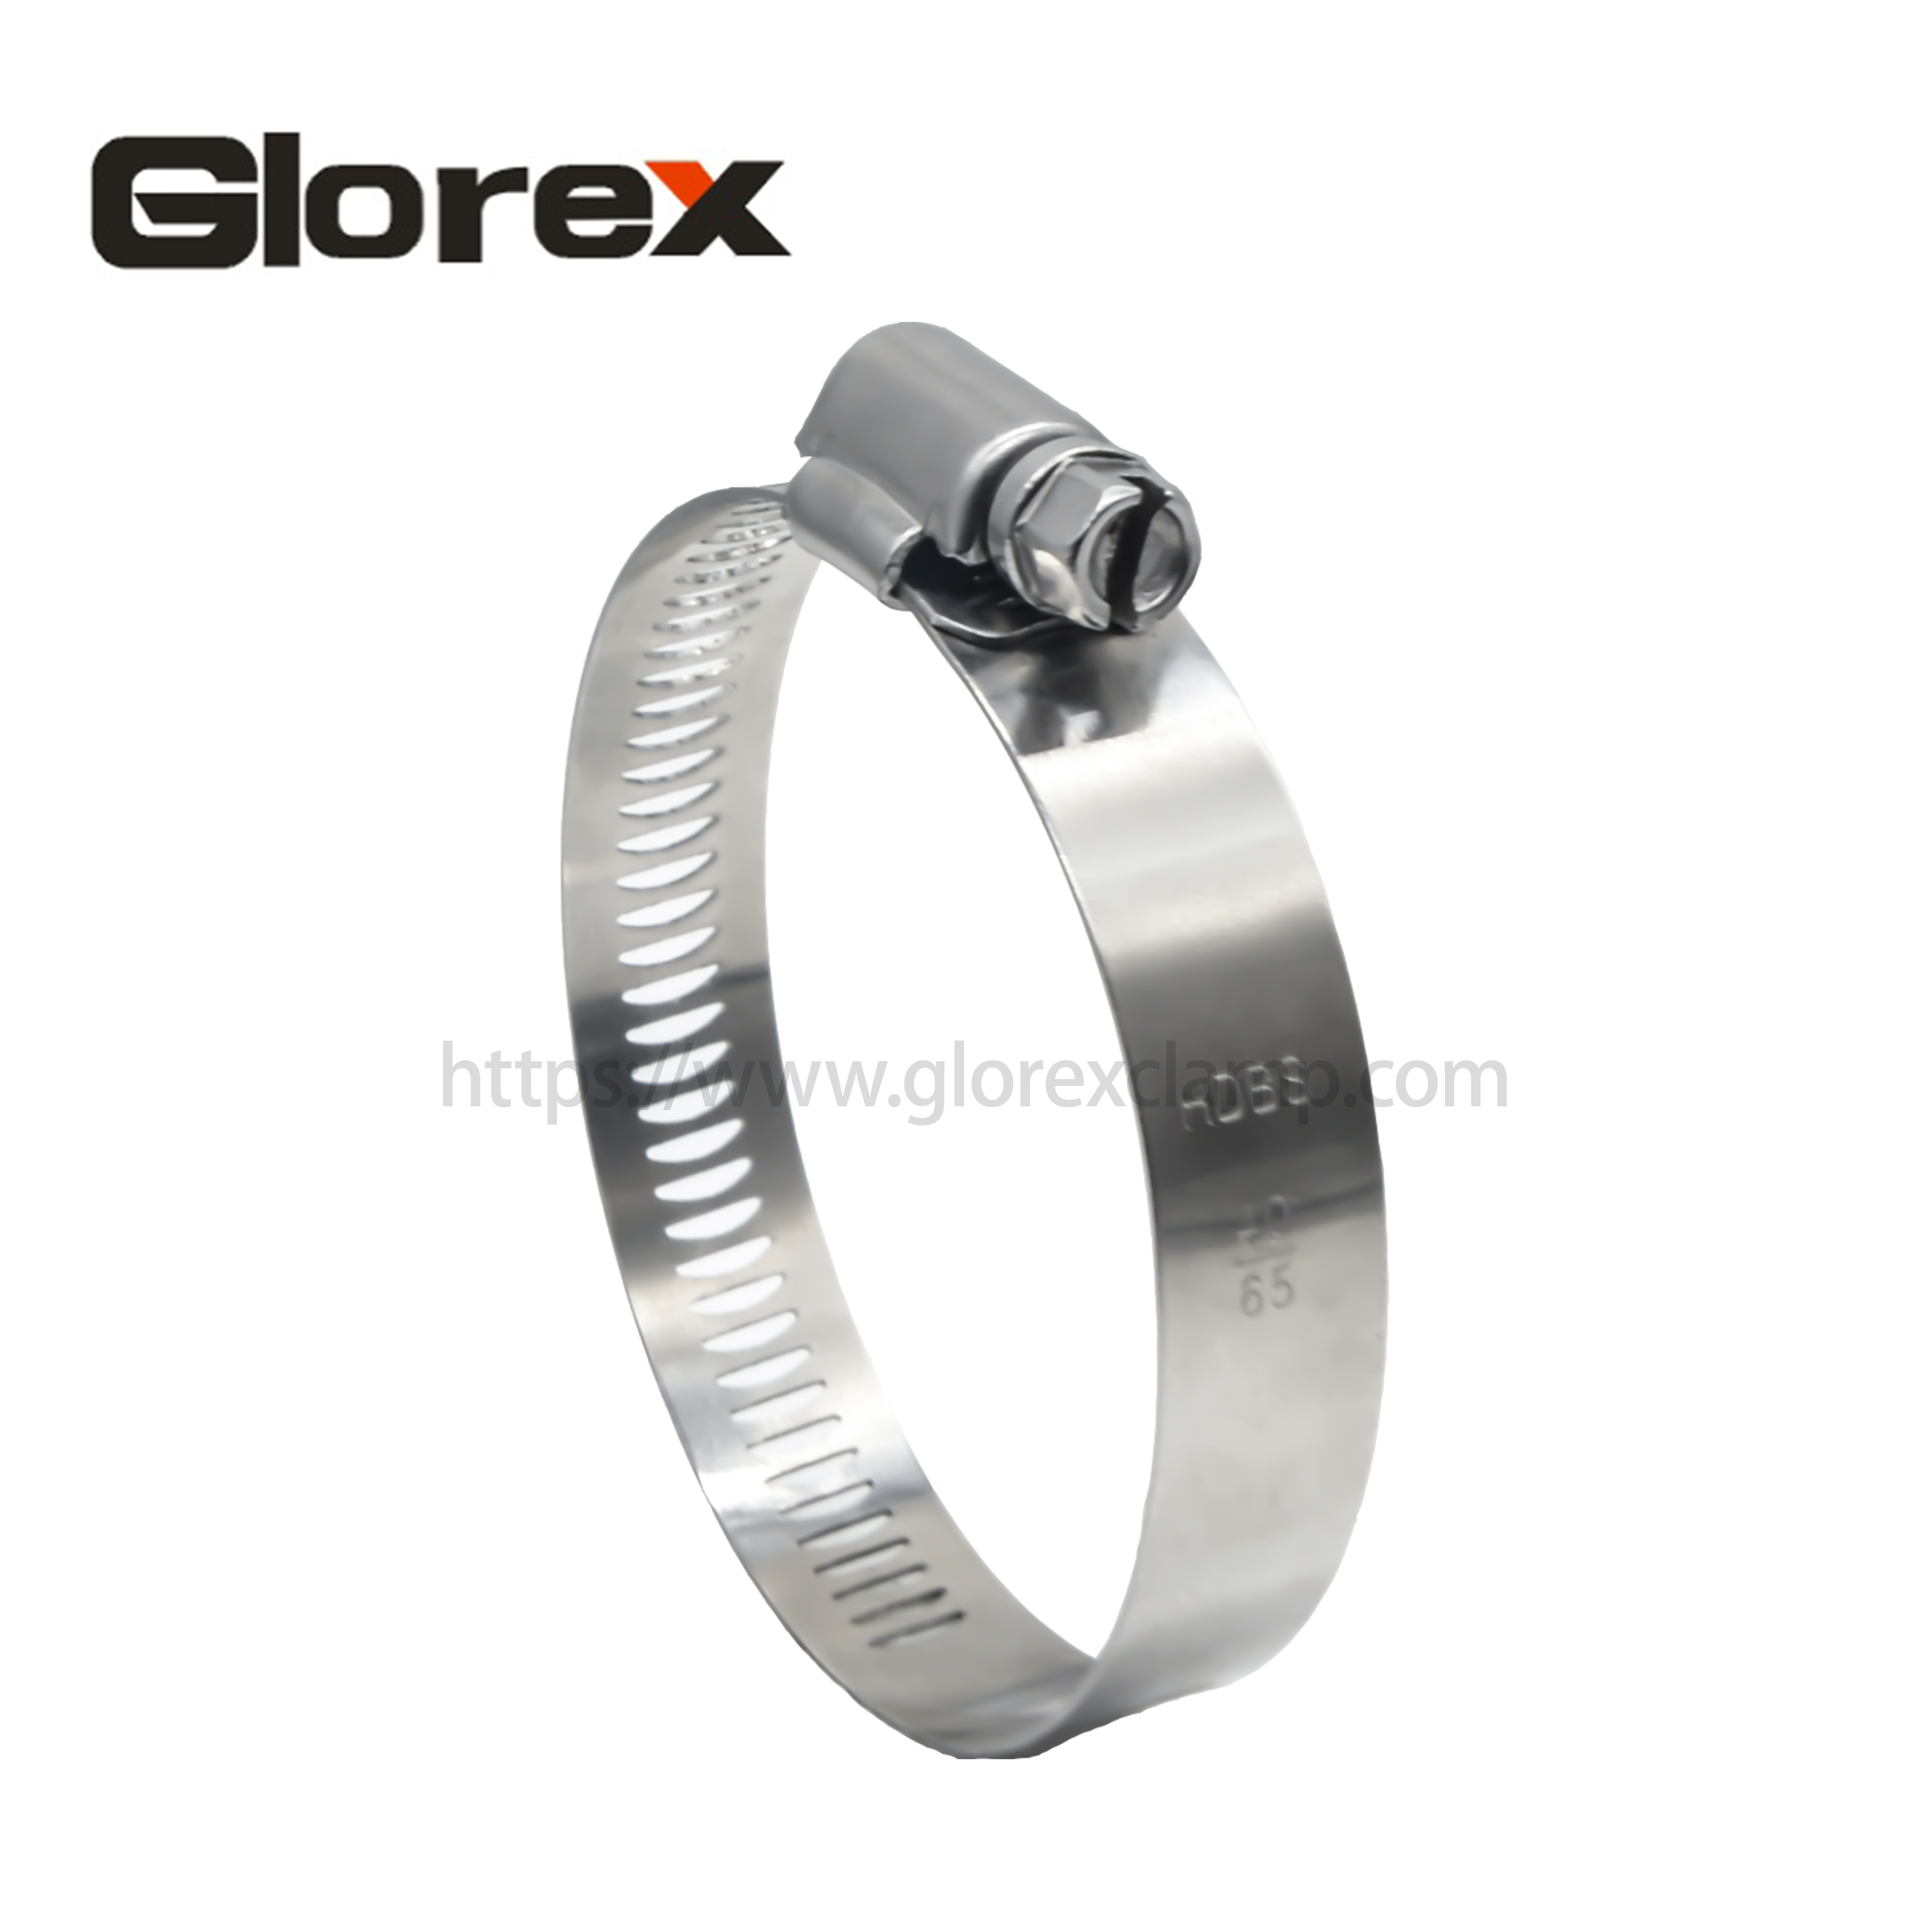 China Supplier Pex Hose Clamps - 14.2mm American type hose clamp – Glorex